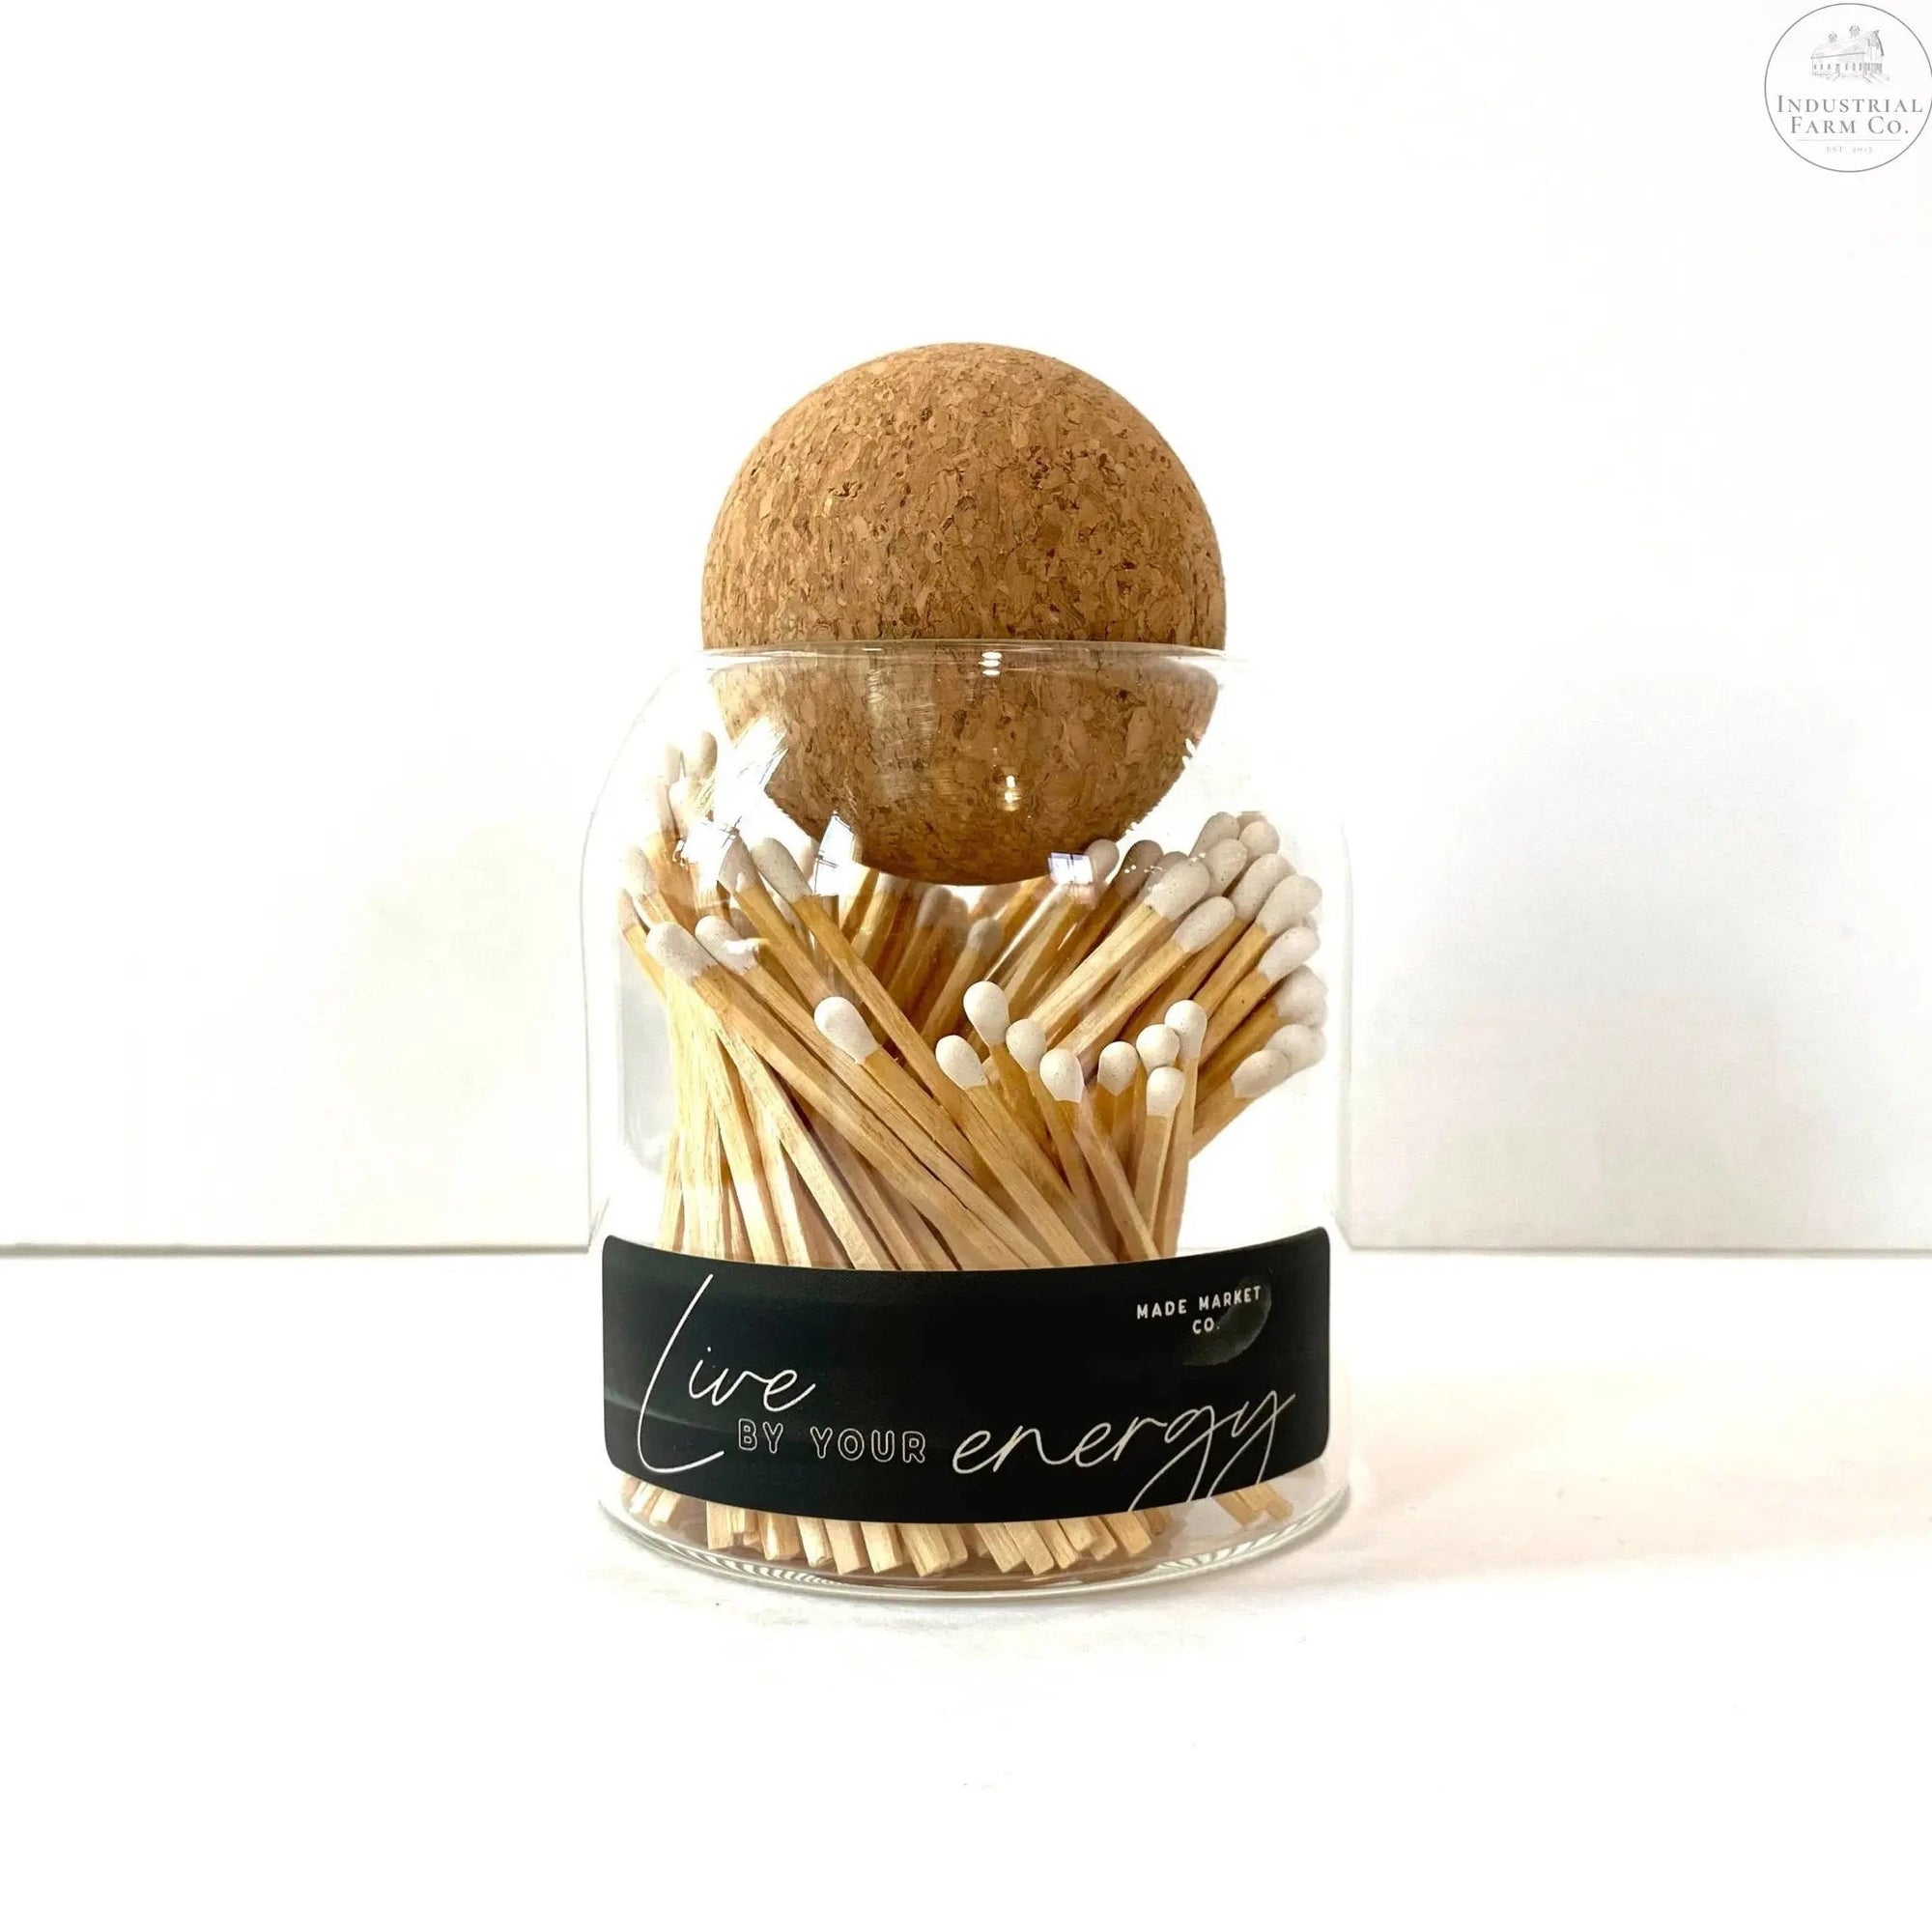 Round Cork Top Matches     | Industrial Farm Co